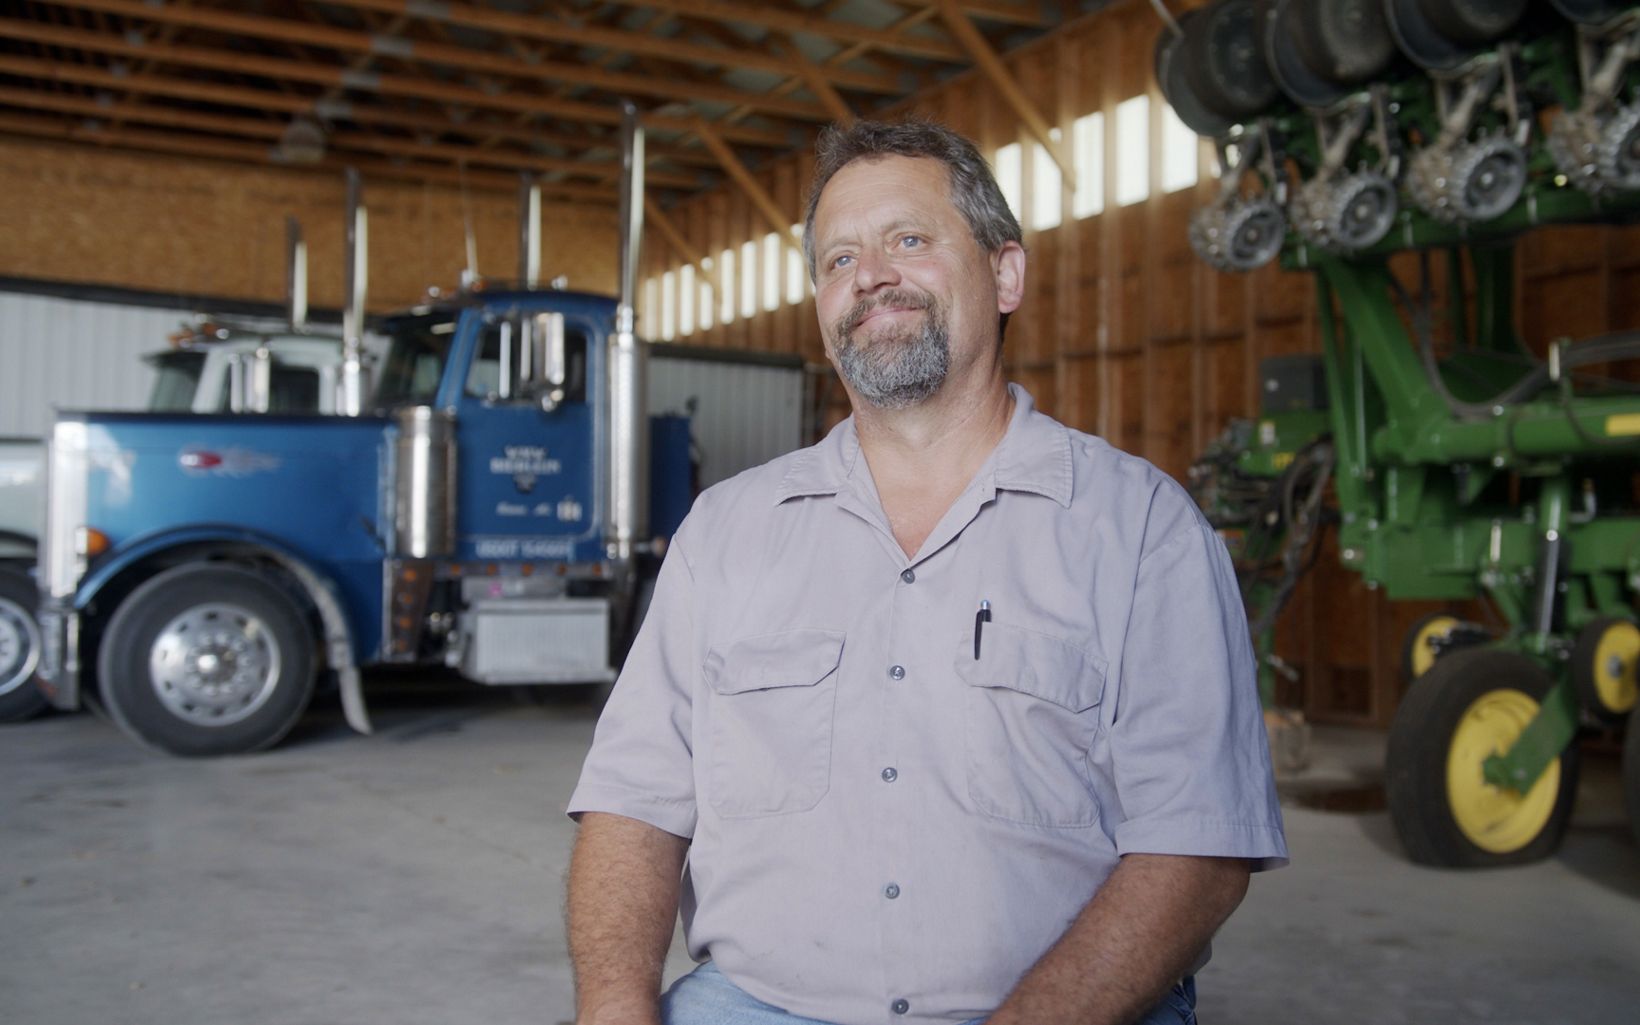 Scott Brechtelsbauer sits in a barn and is surrounded by farm equipment.